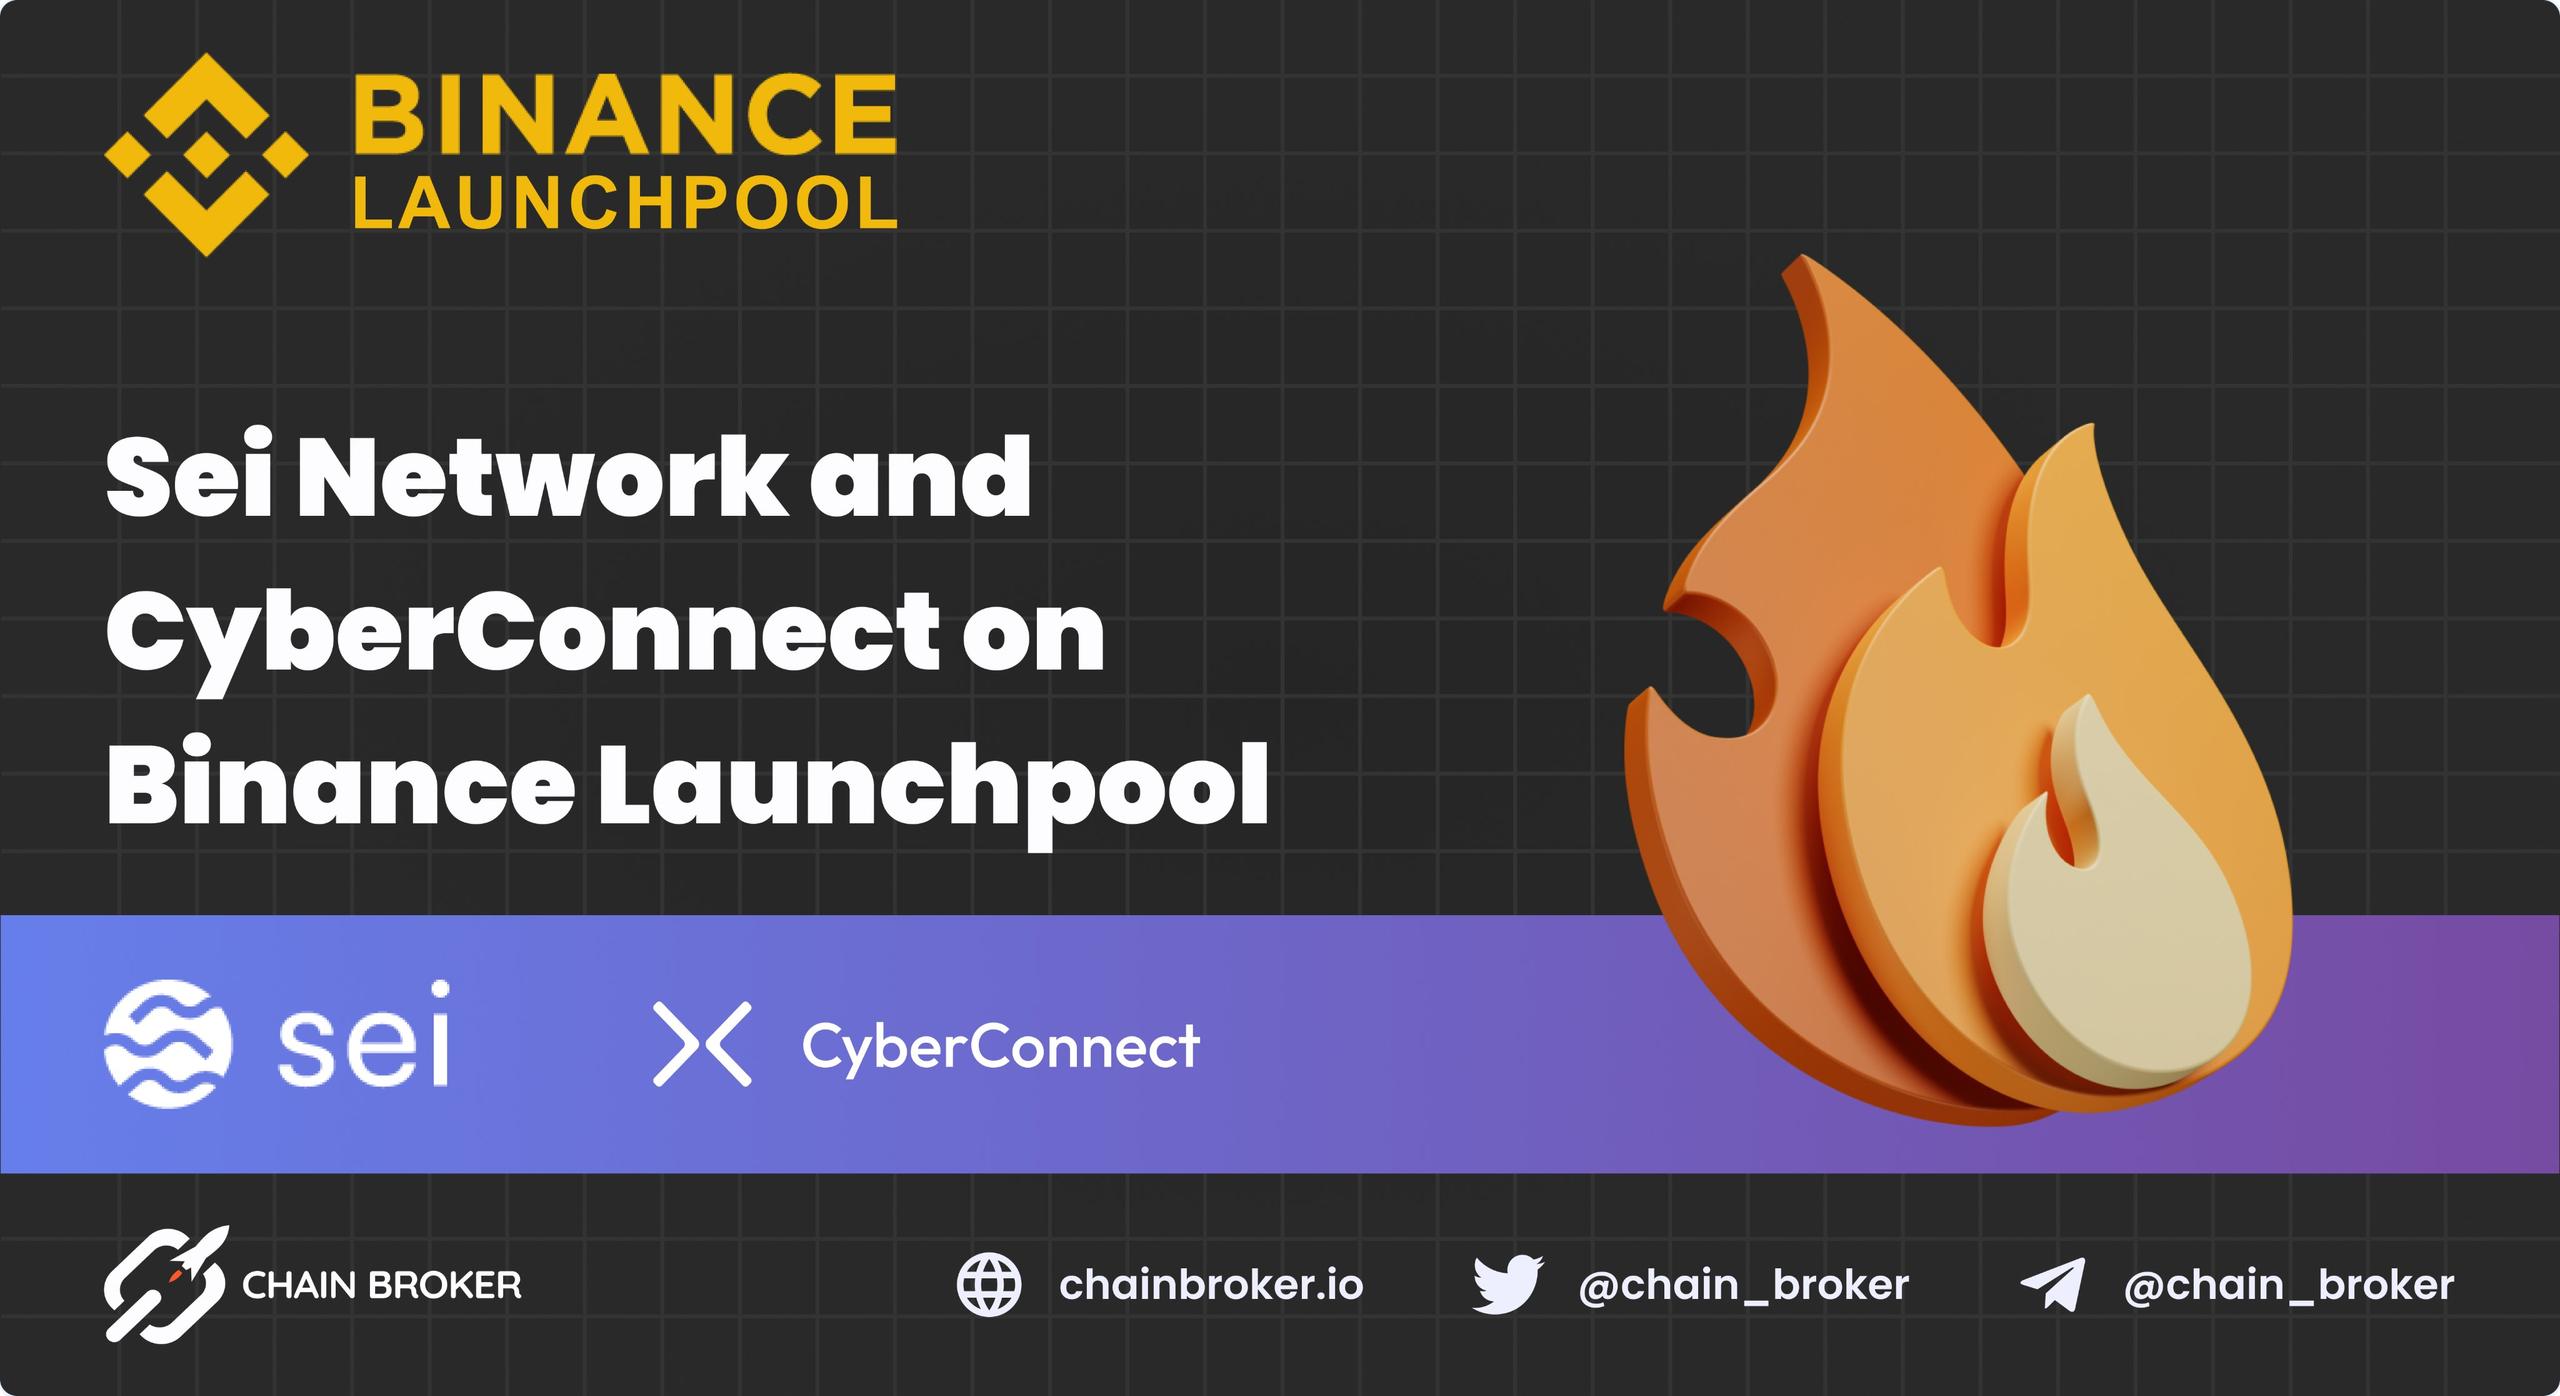 Sei Network and Cyberconnect on Binance Launchpool